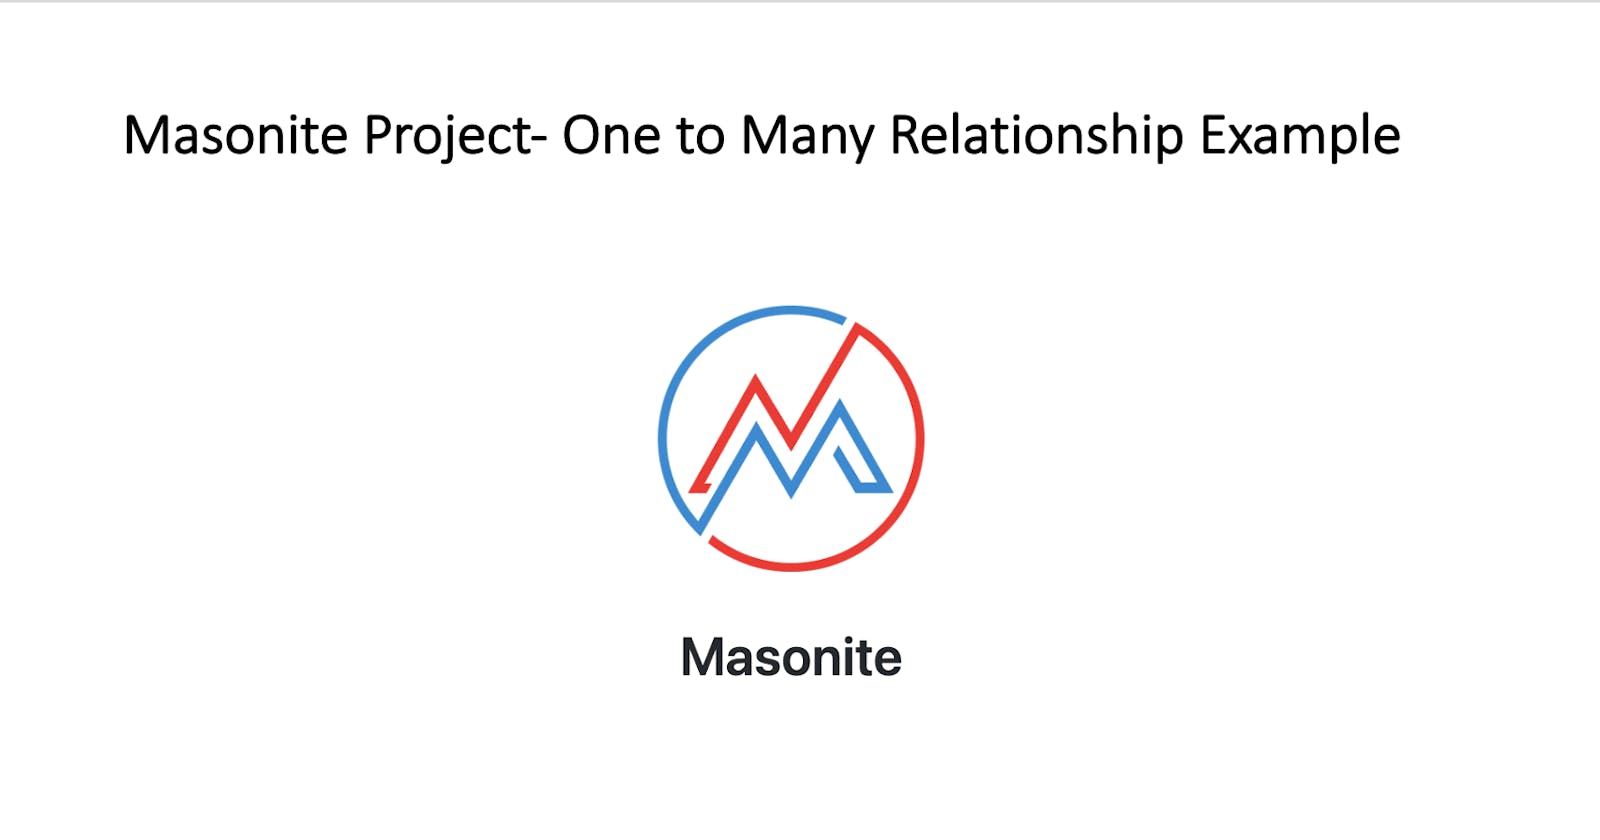 Masonite Project- One to Many Relationship Example